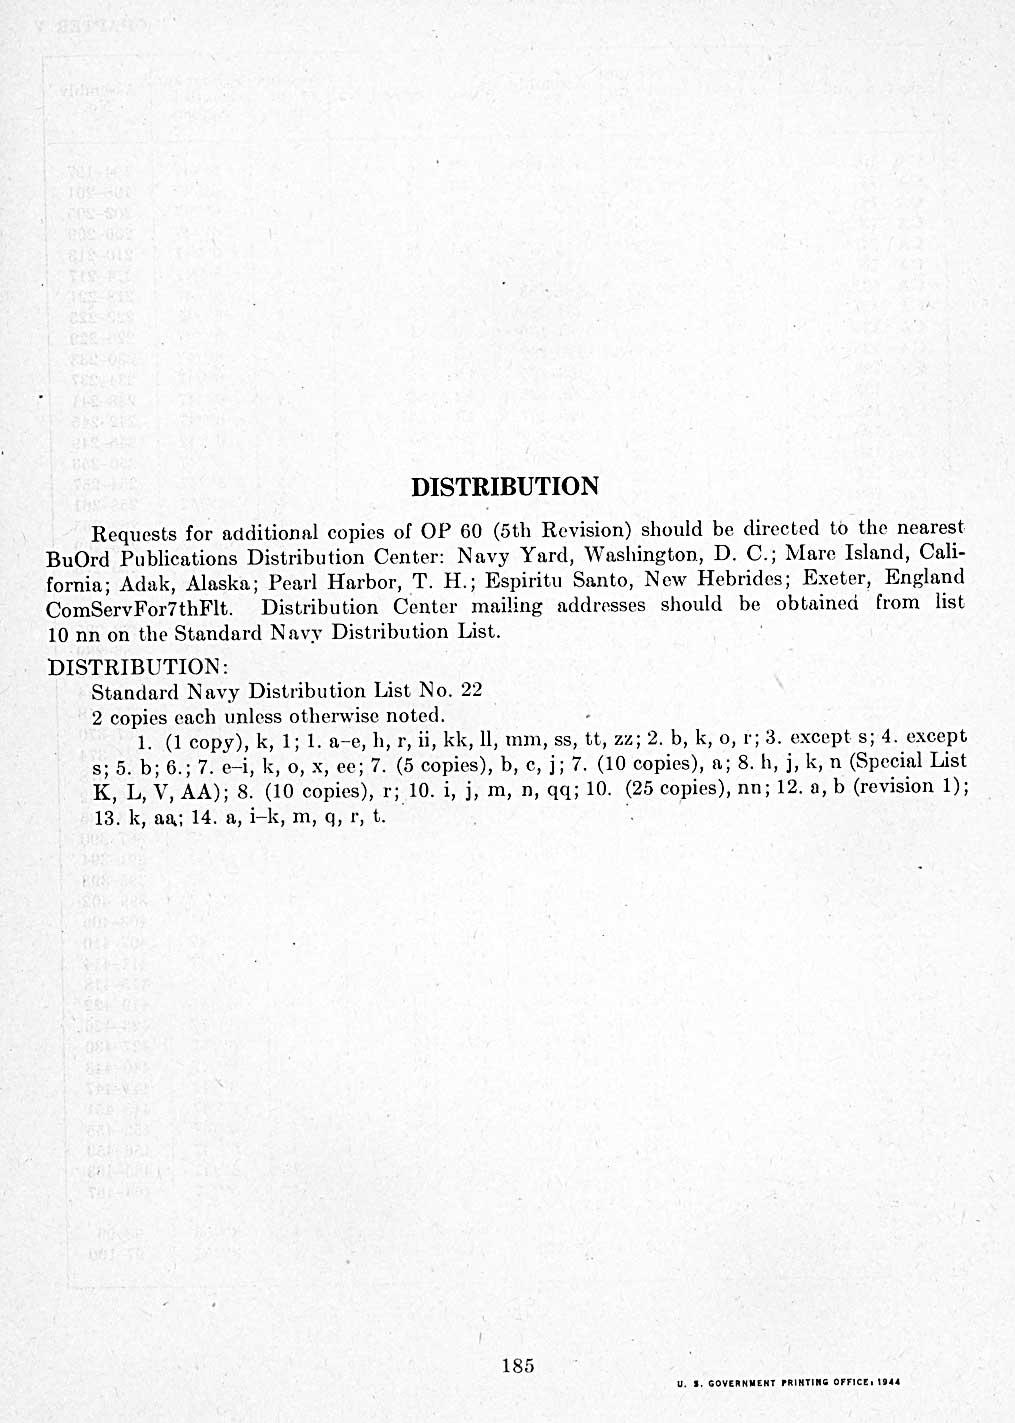 DISTRIBUTION
Requests for additional copies of OP 60 (5th Revision) should be directed to the nearest BuOrd Publications Distribution Center: Navy Yard, Washington, D. C.; Mare Island, California; Adak, Alaska; Pearl Harbor, T. H.; Espiritu Santo, New Hebrides; Exeter, England ComServFor7thFlt. Distribution Center mailing addresses should be obtained from list 10 nn on the Standard Navy Distribution List.
DISTRIBUTION:
Standard Navy Distribution List No. 22
2 copies each unless otherwise noted.
1. (1 copy), k, 1; 1. a-e, h, r, ii, kk, 11, mm, ss, tt, zz; 2. b, k, o, r; 3. except s; 4. except s; 5. b; 6.; 7. e-i, k, o, x, ee; 7. (5 copies), b, c, j; 7. (10 copies), a; 8. h, j, k, n (Special List K, L, V, AA); 8. (10 copies), r; 10. i, j, m, n, qq; 10. (25 copies), nn; 12. a, b (revision 1); 13. k, aa; 14. a, i-k, m, q, r, t.
U. S. GOVERNMENT PRINTING OFFICE, 1944
